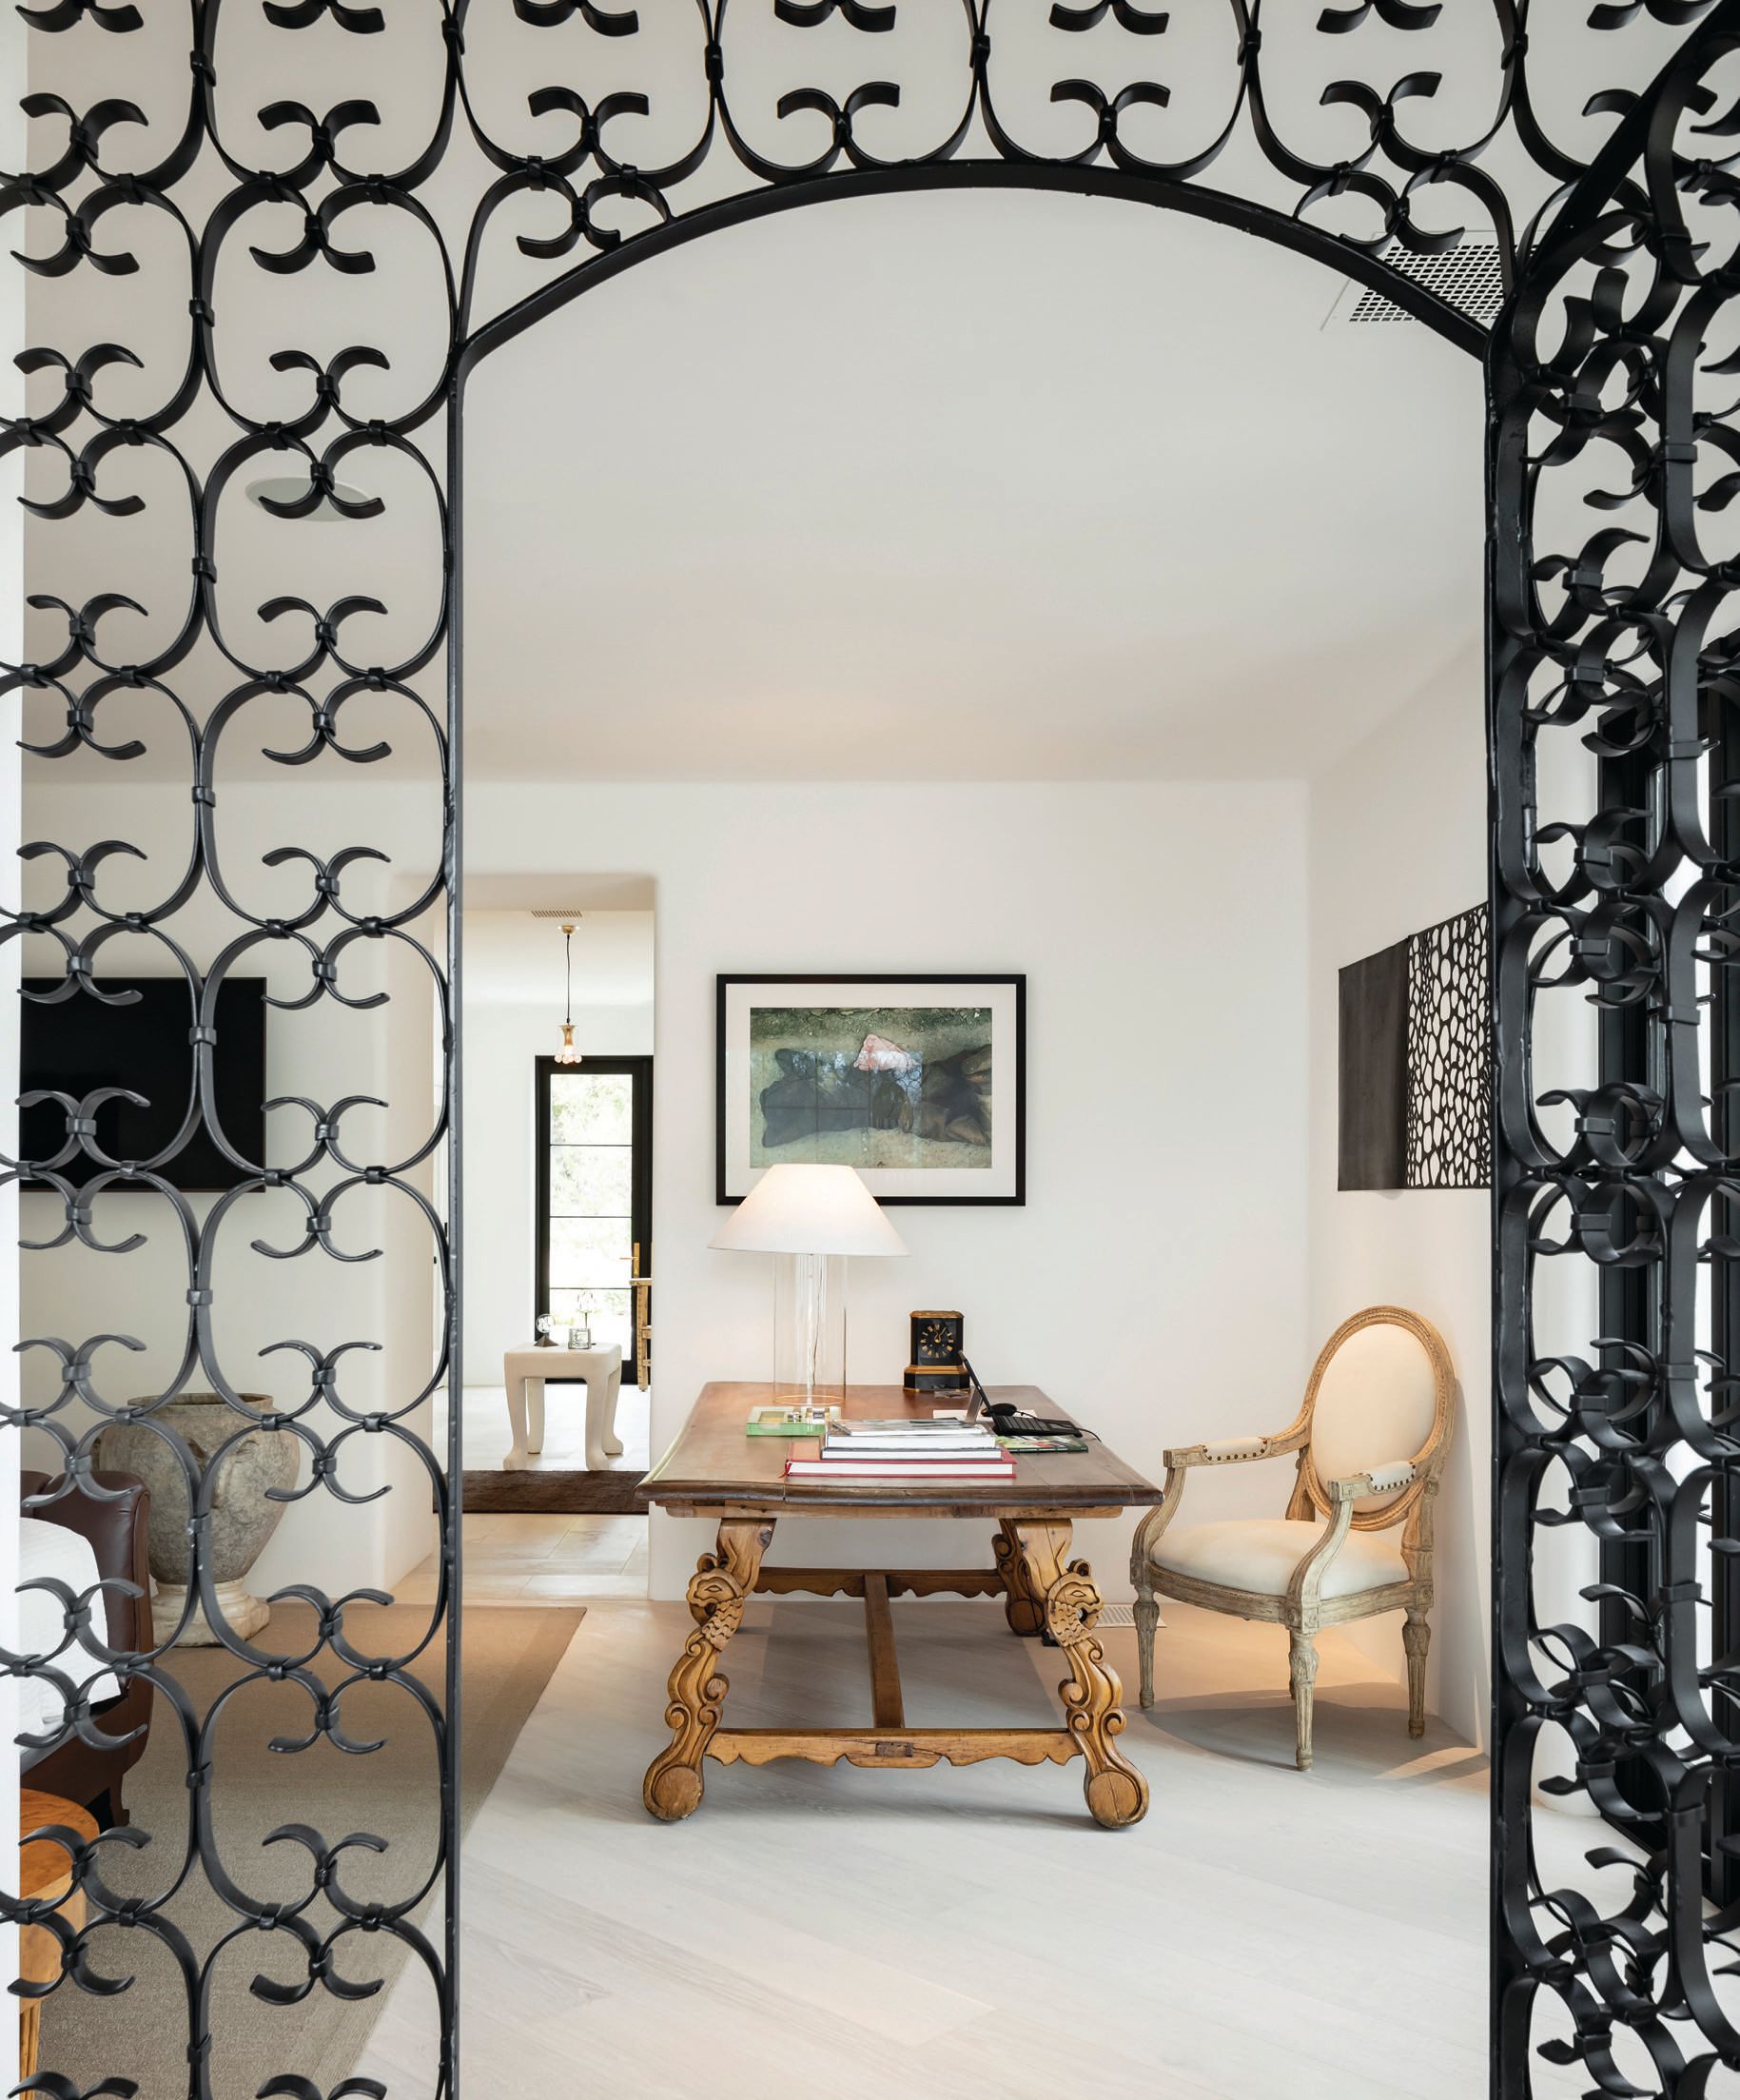 In lieu of a door, Boland created an eye-catching primary bedroom entrance made from reclaimed garden gates and surrounds found at a home in Scandinavia. The photograph over the antique desk was purchased from the collection of fashion photographer Mario Testino. Photographed by Joe Cotitta